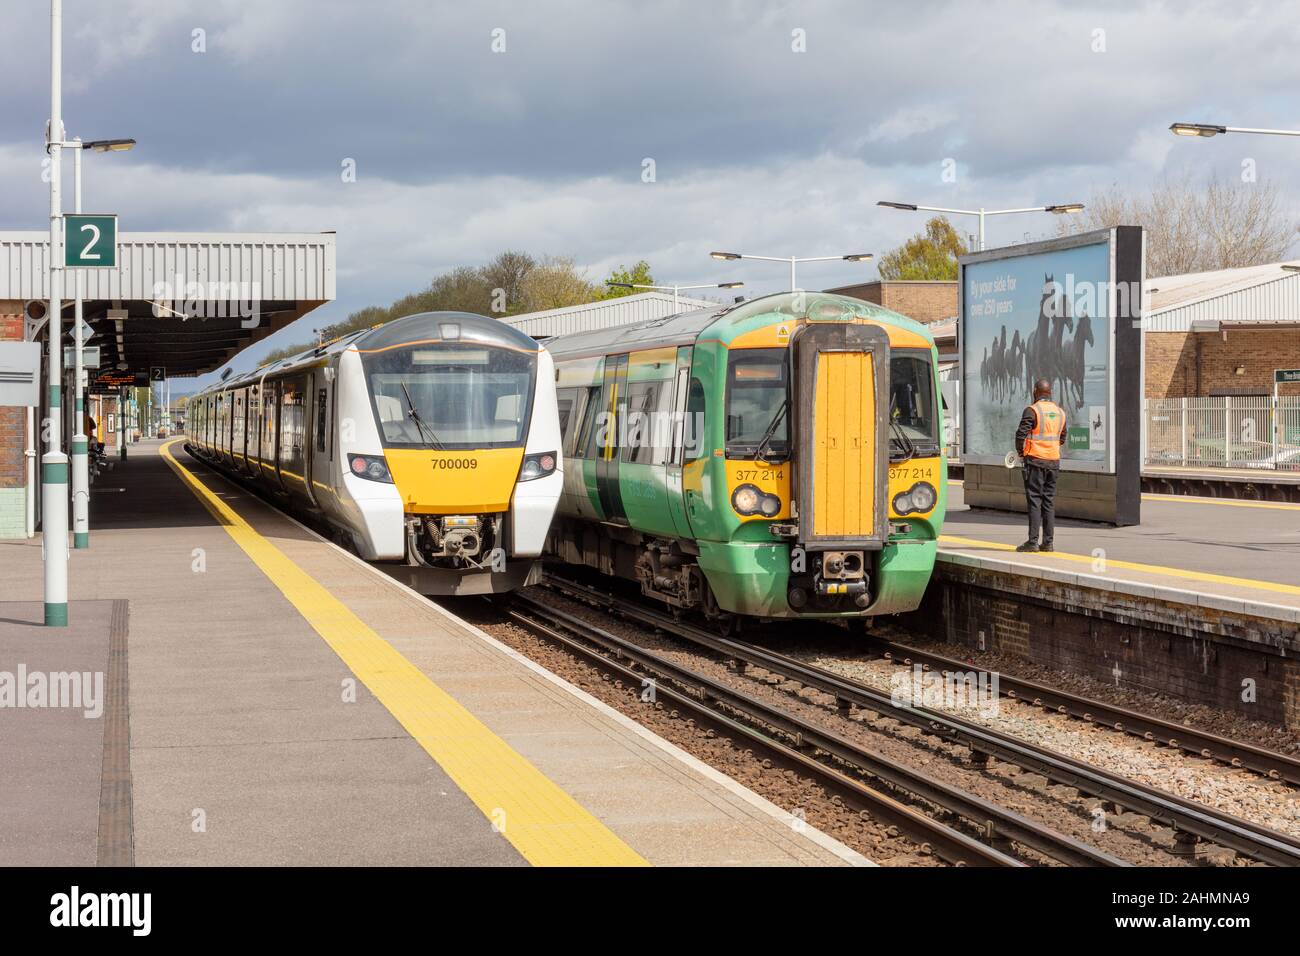 Three Bridges, Sussex, UK; 26th April 2018; Trains Operated by Thameslink and Southern Stand Alongside Each Other at Three Bridges Station Stock Photo